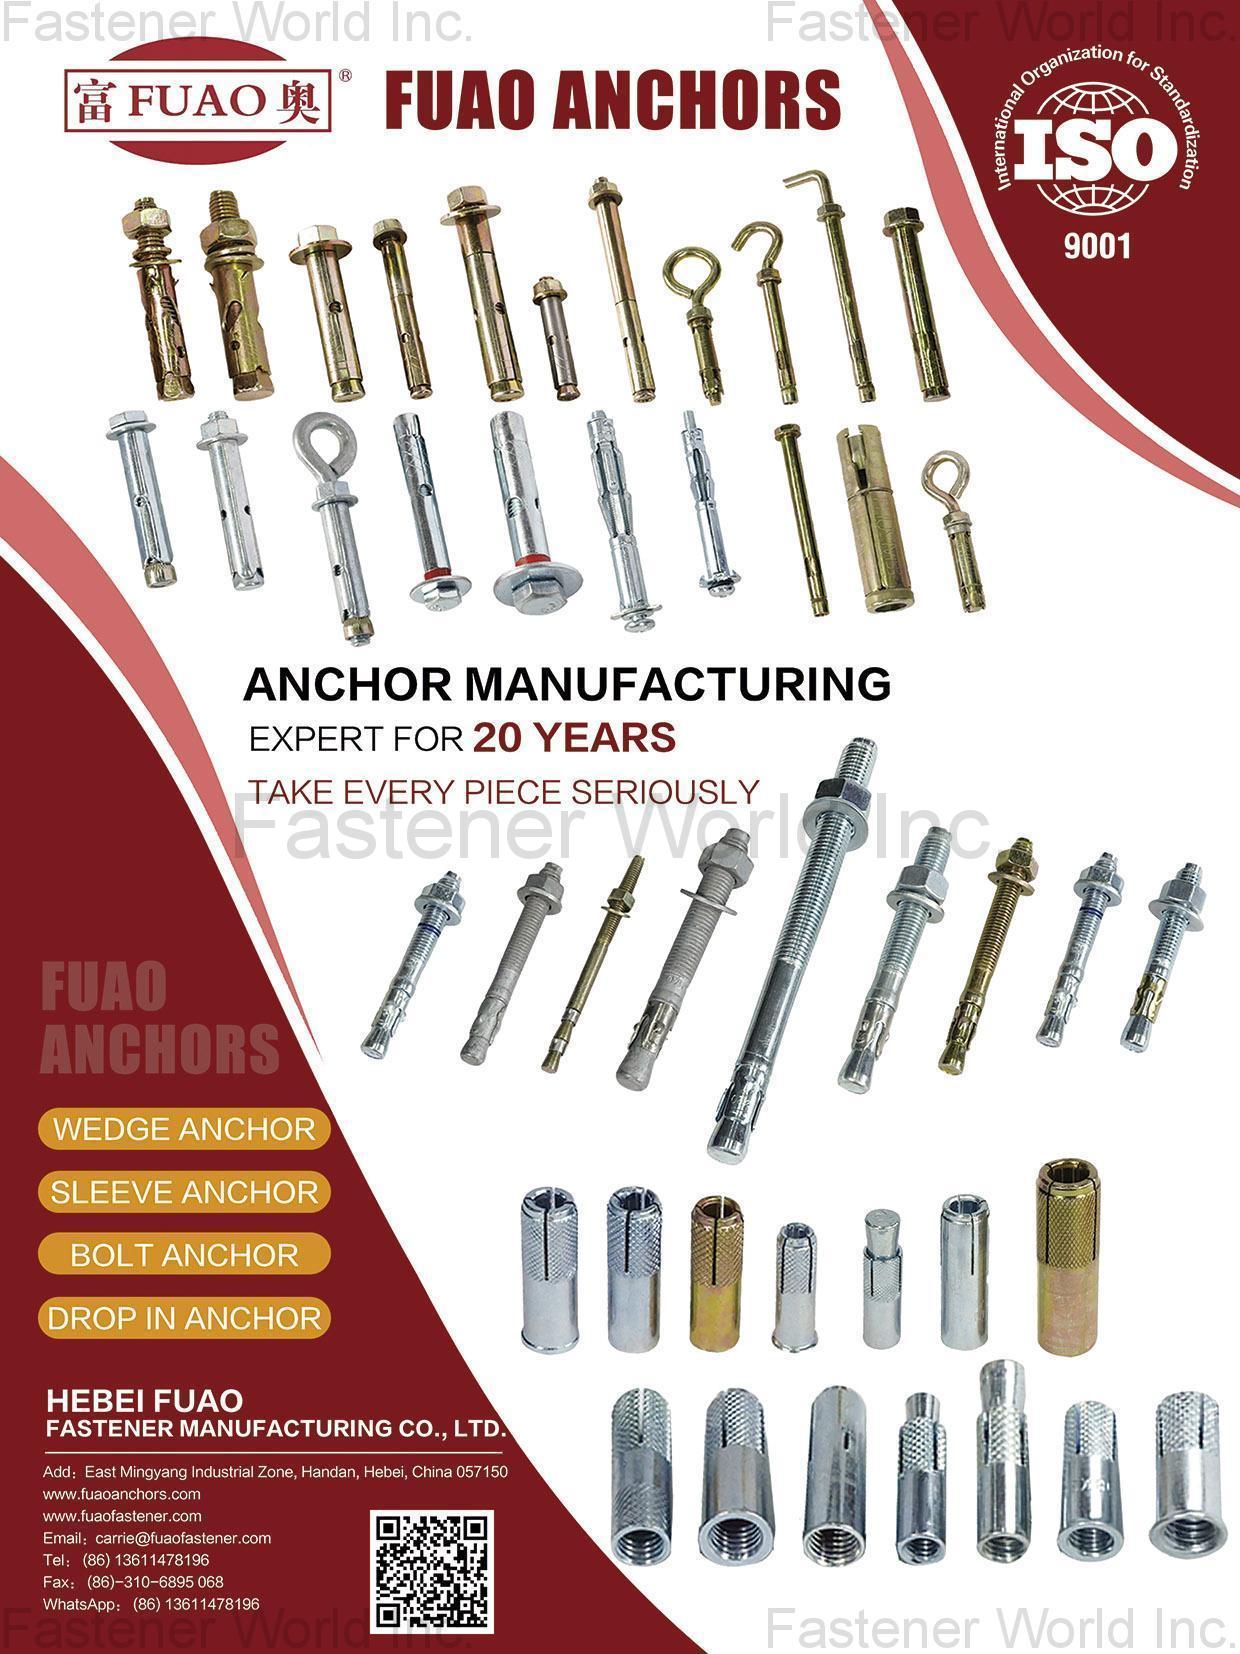 HEBEI FUAO FASTENER MANUFACTURING CO., LTD , Wedge Anchors, Drop In Anchors, Chemical Anchors, One Pc Anchors, Bolt Anchors, Sleeve Anchors, Pan Anchors, 3.4pc Anchors, Metal Frame Anchors